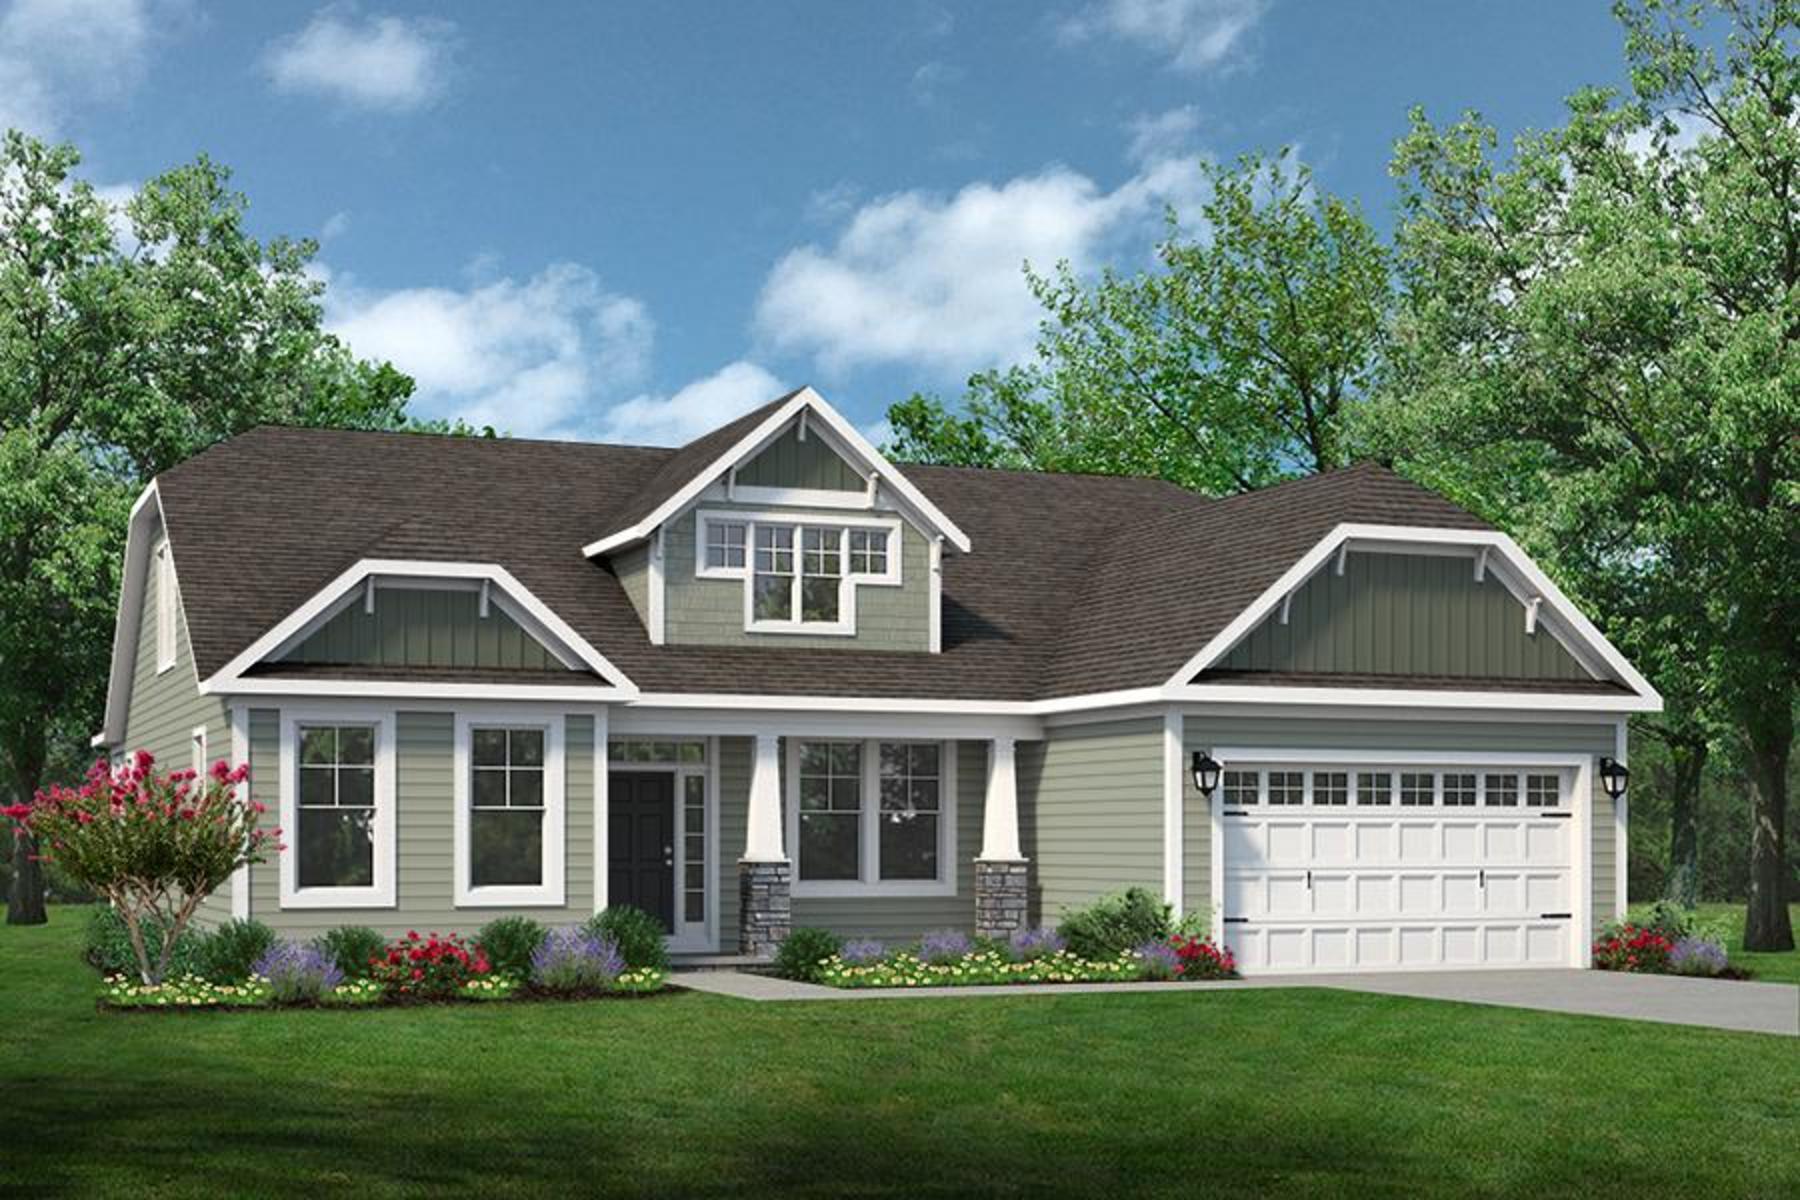 Elevation F. 2,460sf New Home in Suffolk, VA